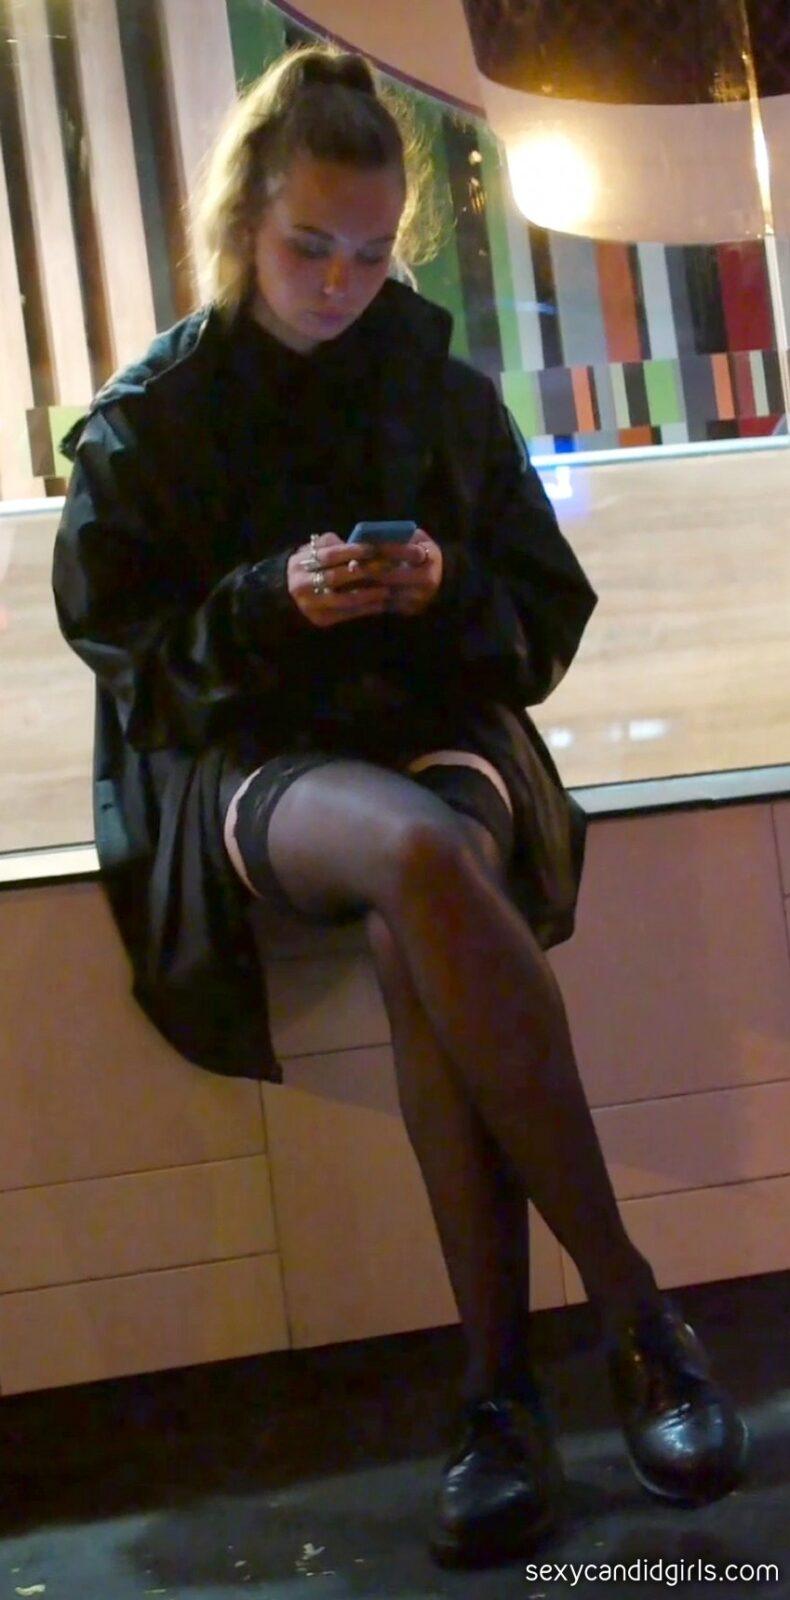 Young Blonde Candid Teen In Stockings With Sexy Legs pic